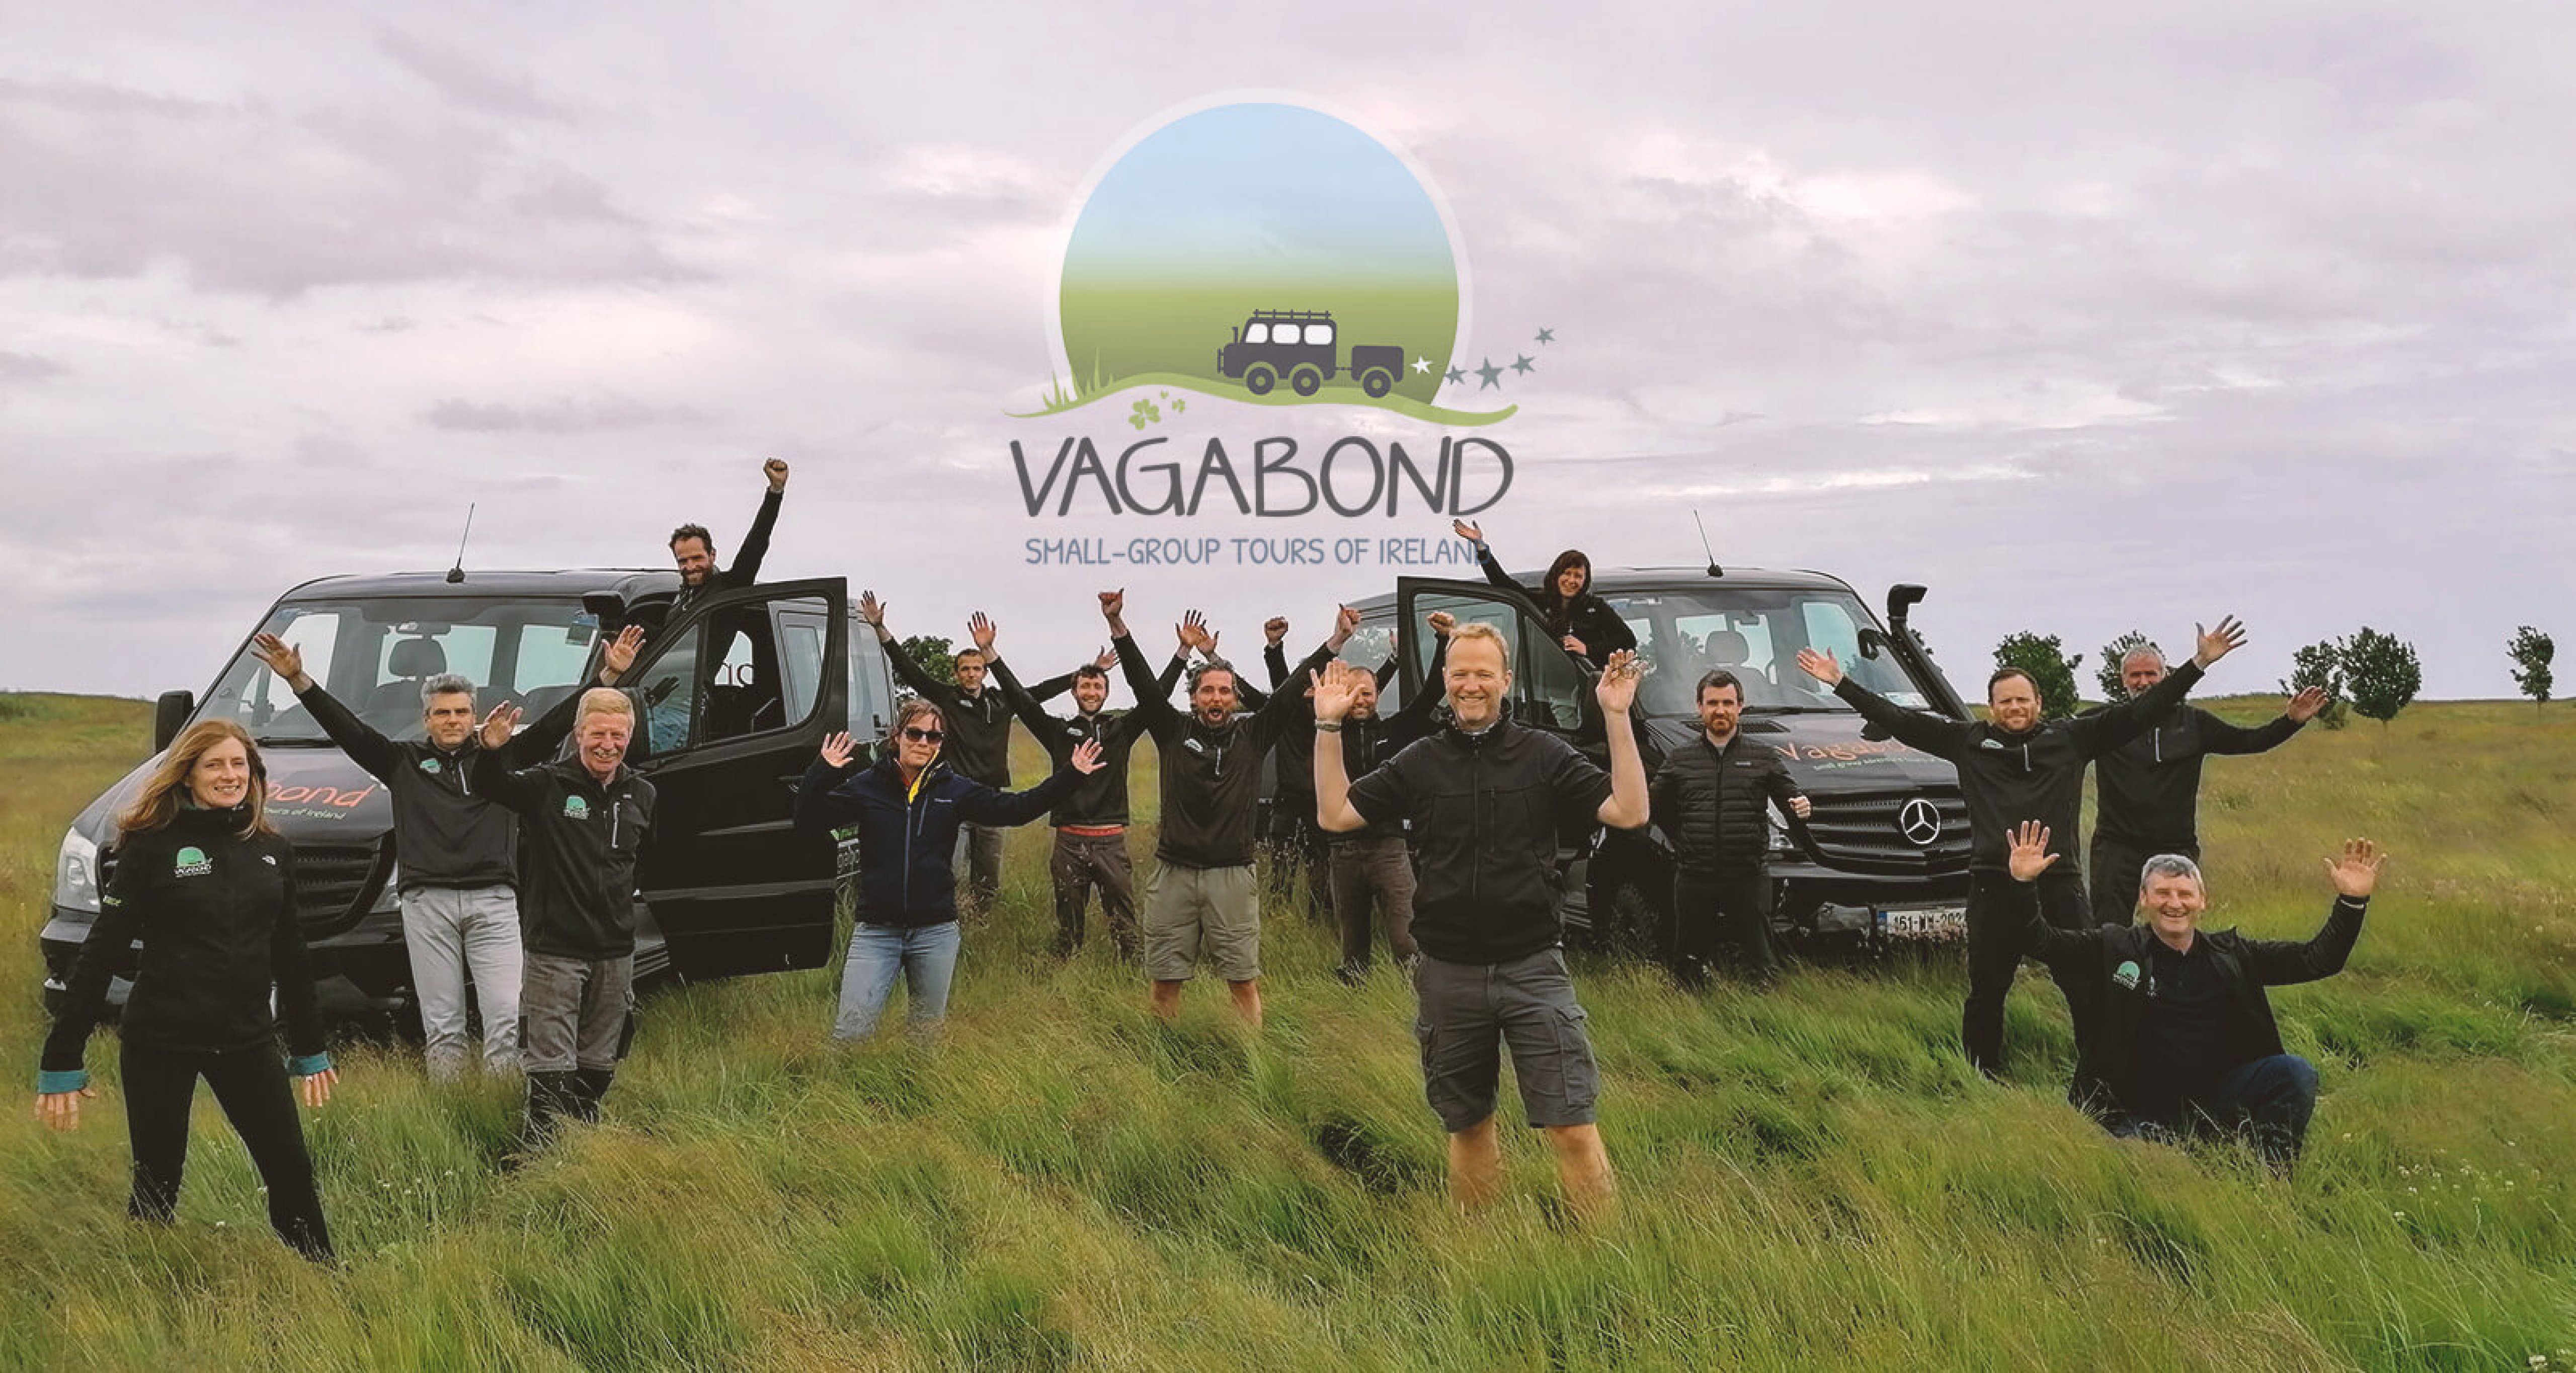 Vagabond tour guide team with company logo and vehicles